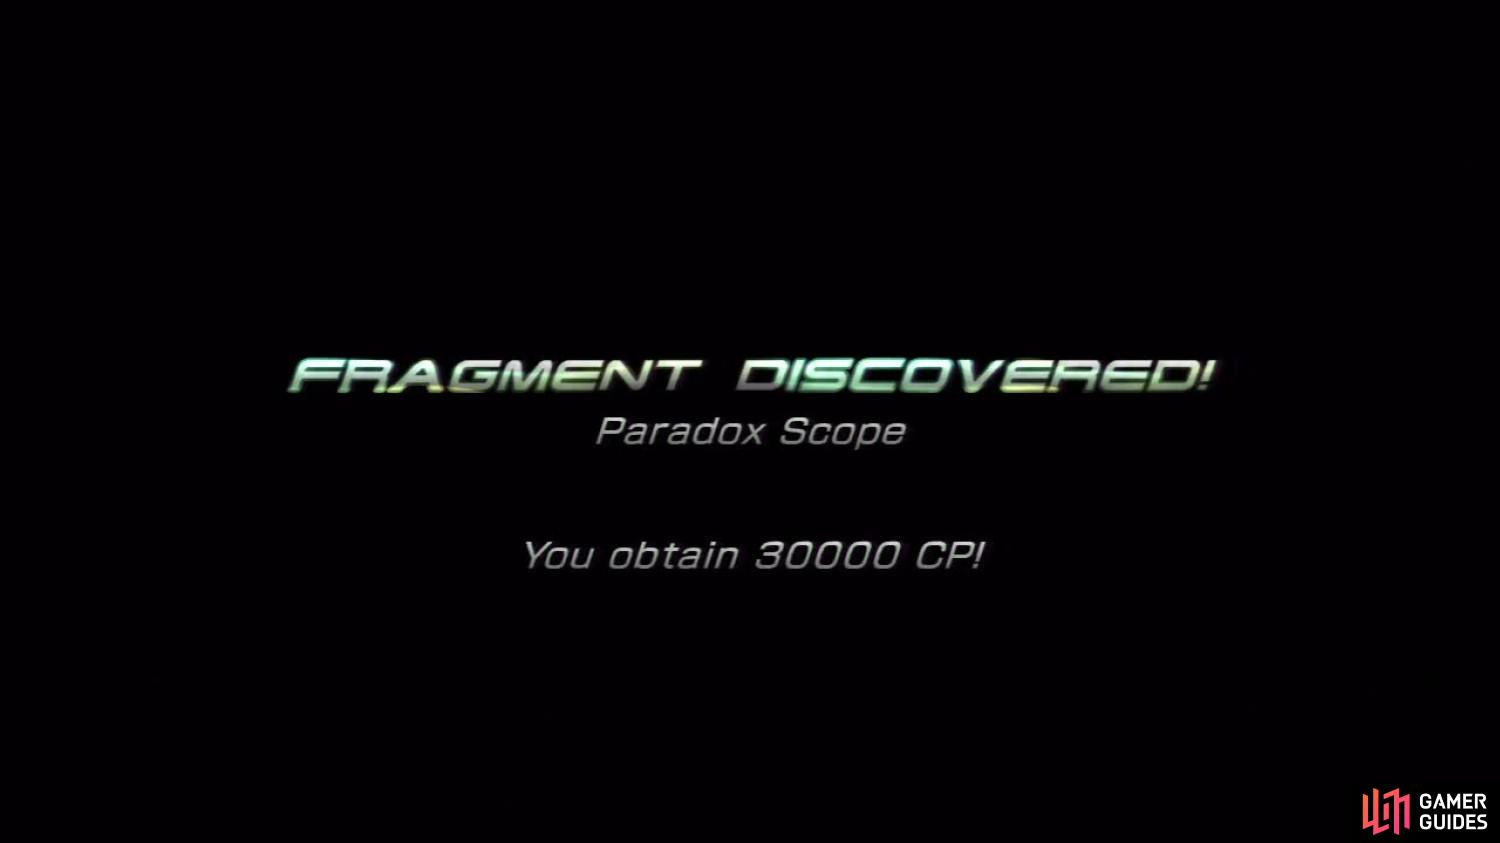 You will earn the Paradox Scope for beating the game. This allows you to view alternative endings to pivotal scenes in the game.